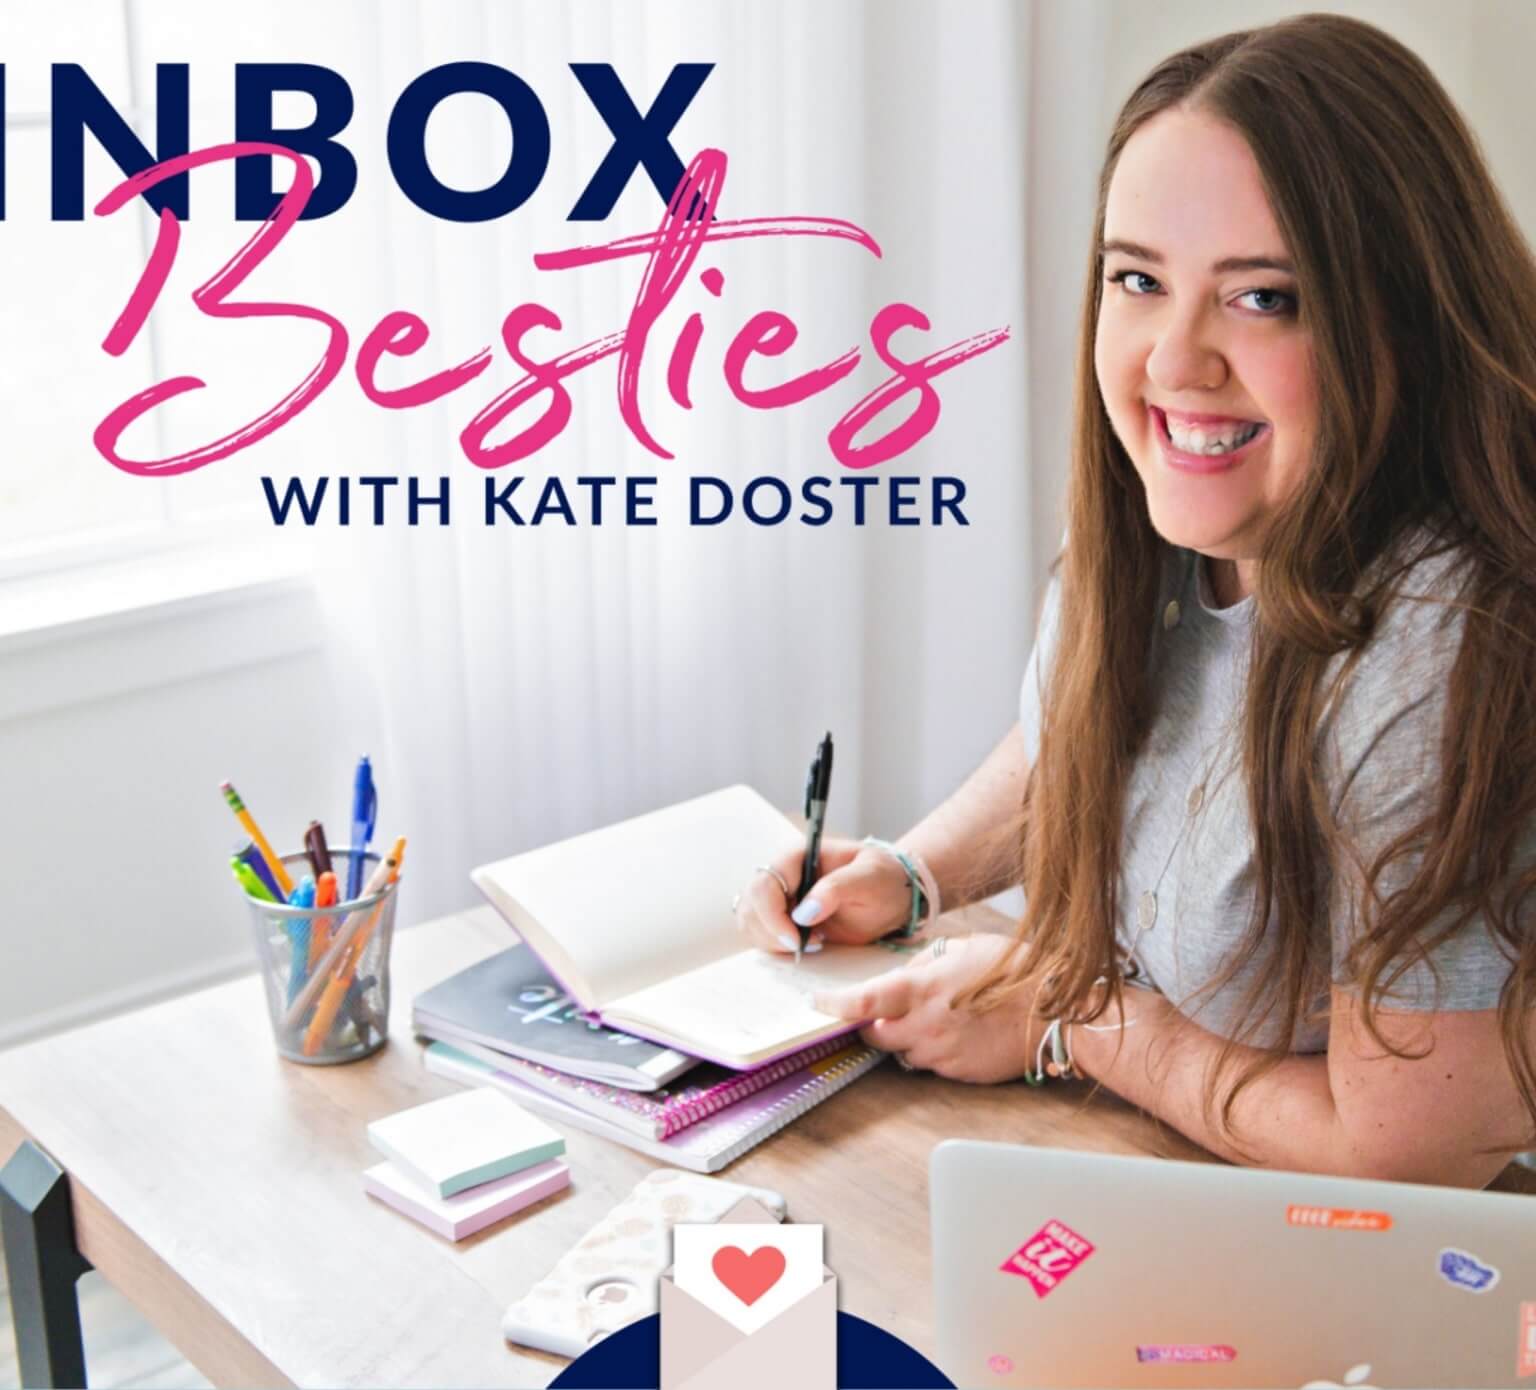 Kate Doster Email Marketing Strategist | Inbox Besties Podcast